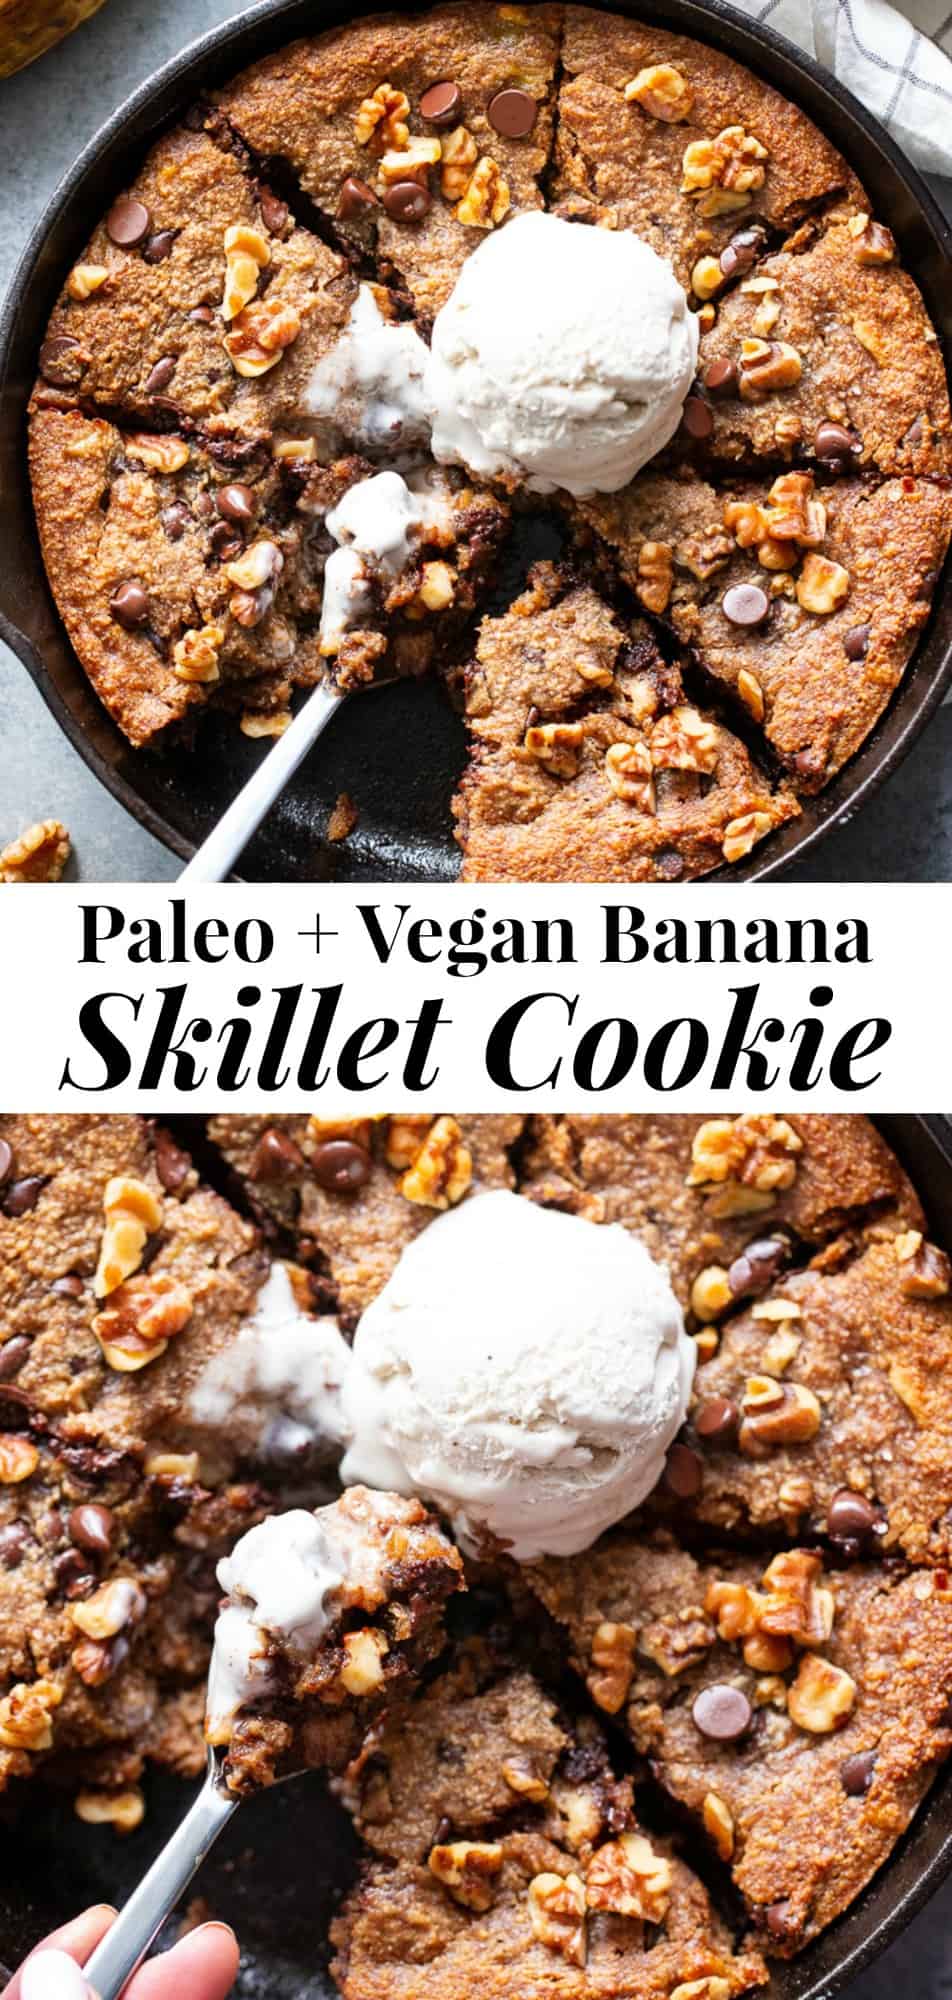 This gooey sweet banana chocolate chip skillet cookie is a dessert that’s heathy enough for breakfast!  It’s loaded with healthy fats, sweetened with bananas and unrefined maple sugar and packed with dark chocolate chips and walnuts.  Gluten-free, grain free, paleo, dairy free, and vegan too! #vegan #paleo #glutenfree